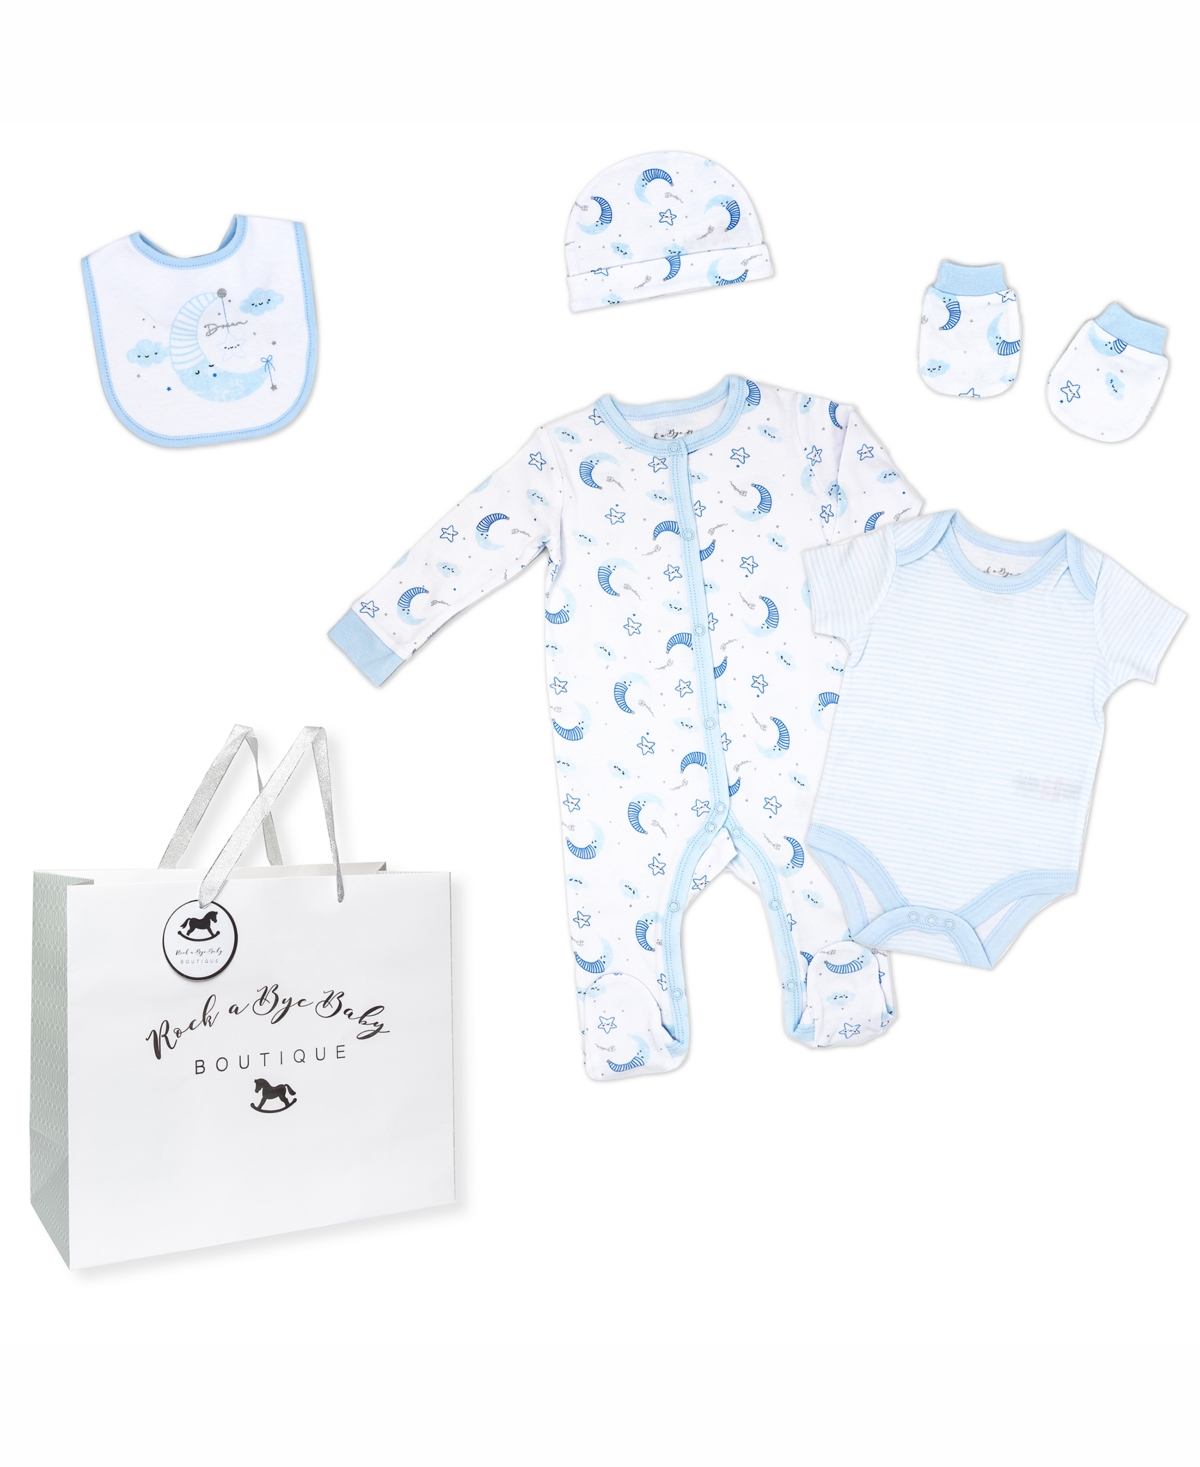 Rock-a-bye Baby Boutique Baby Boys Layette Gift Bag Set In Dreaming Moon